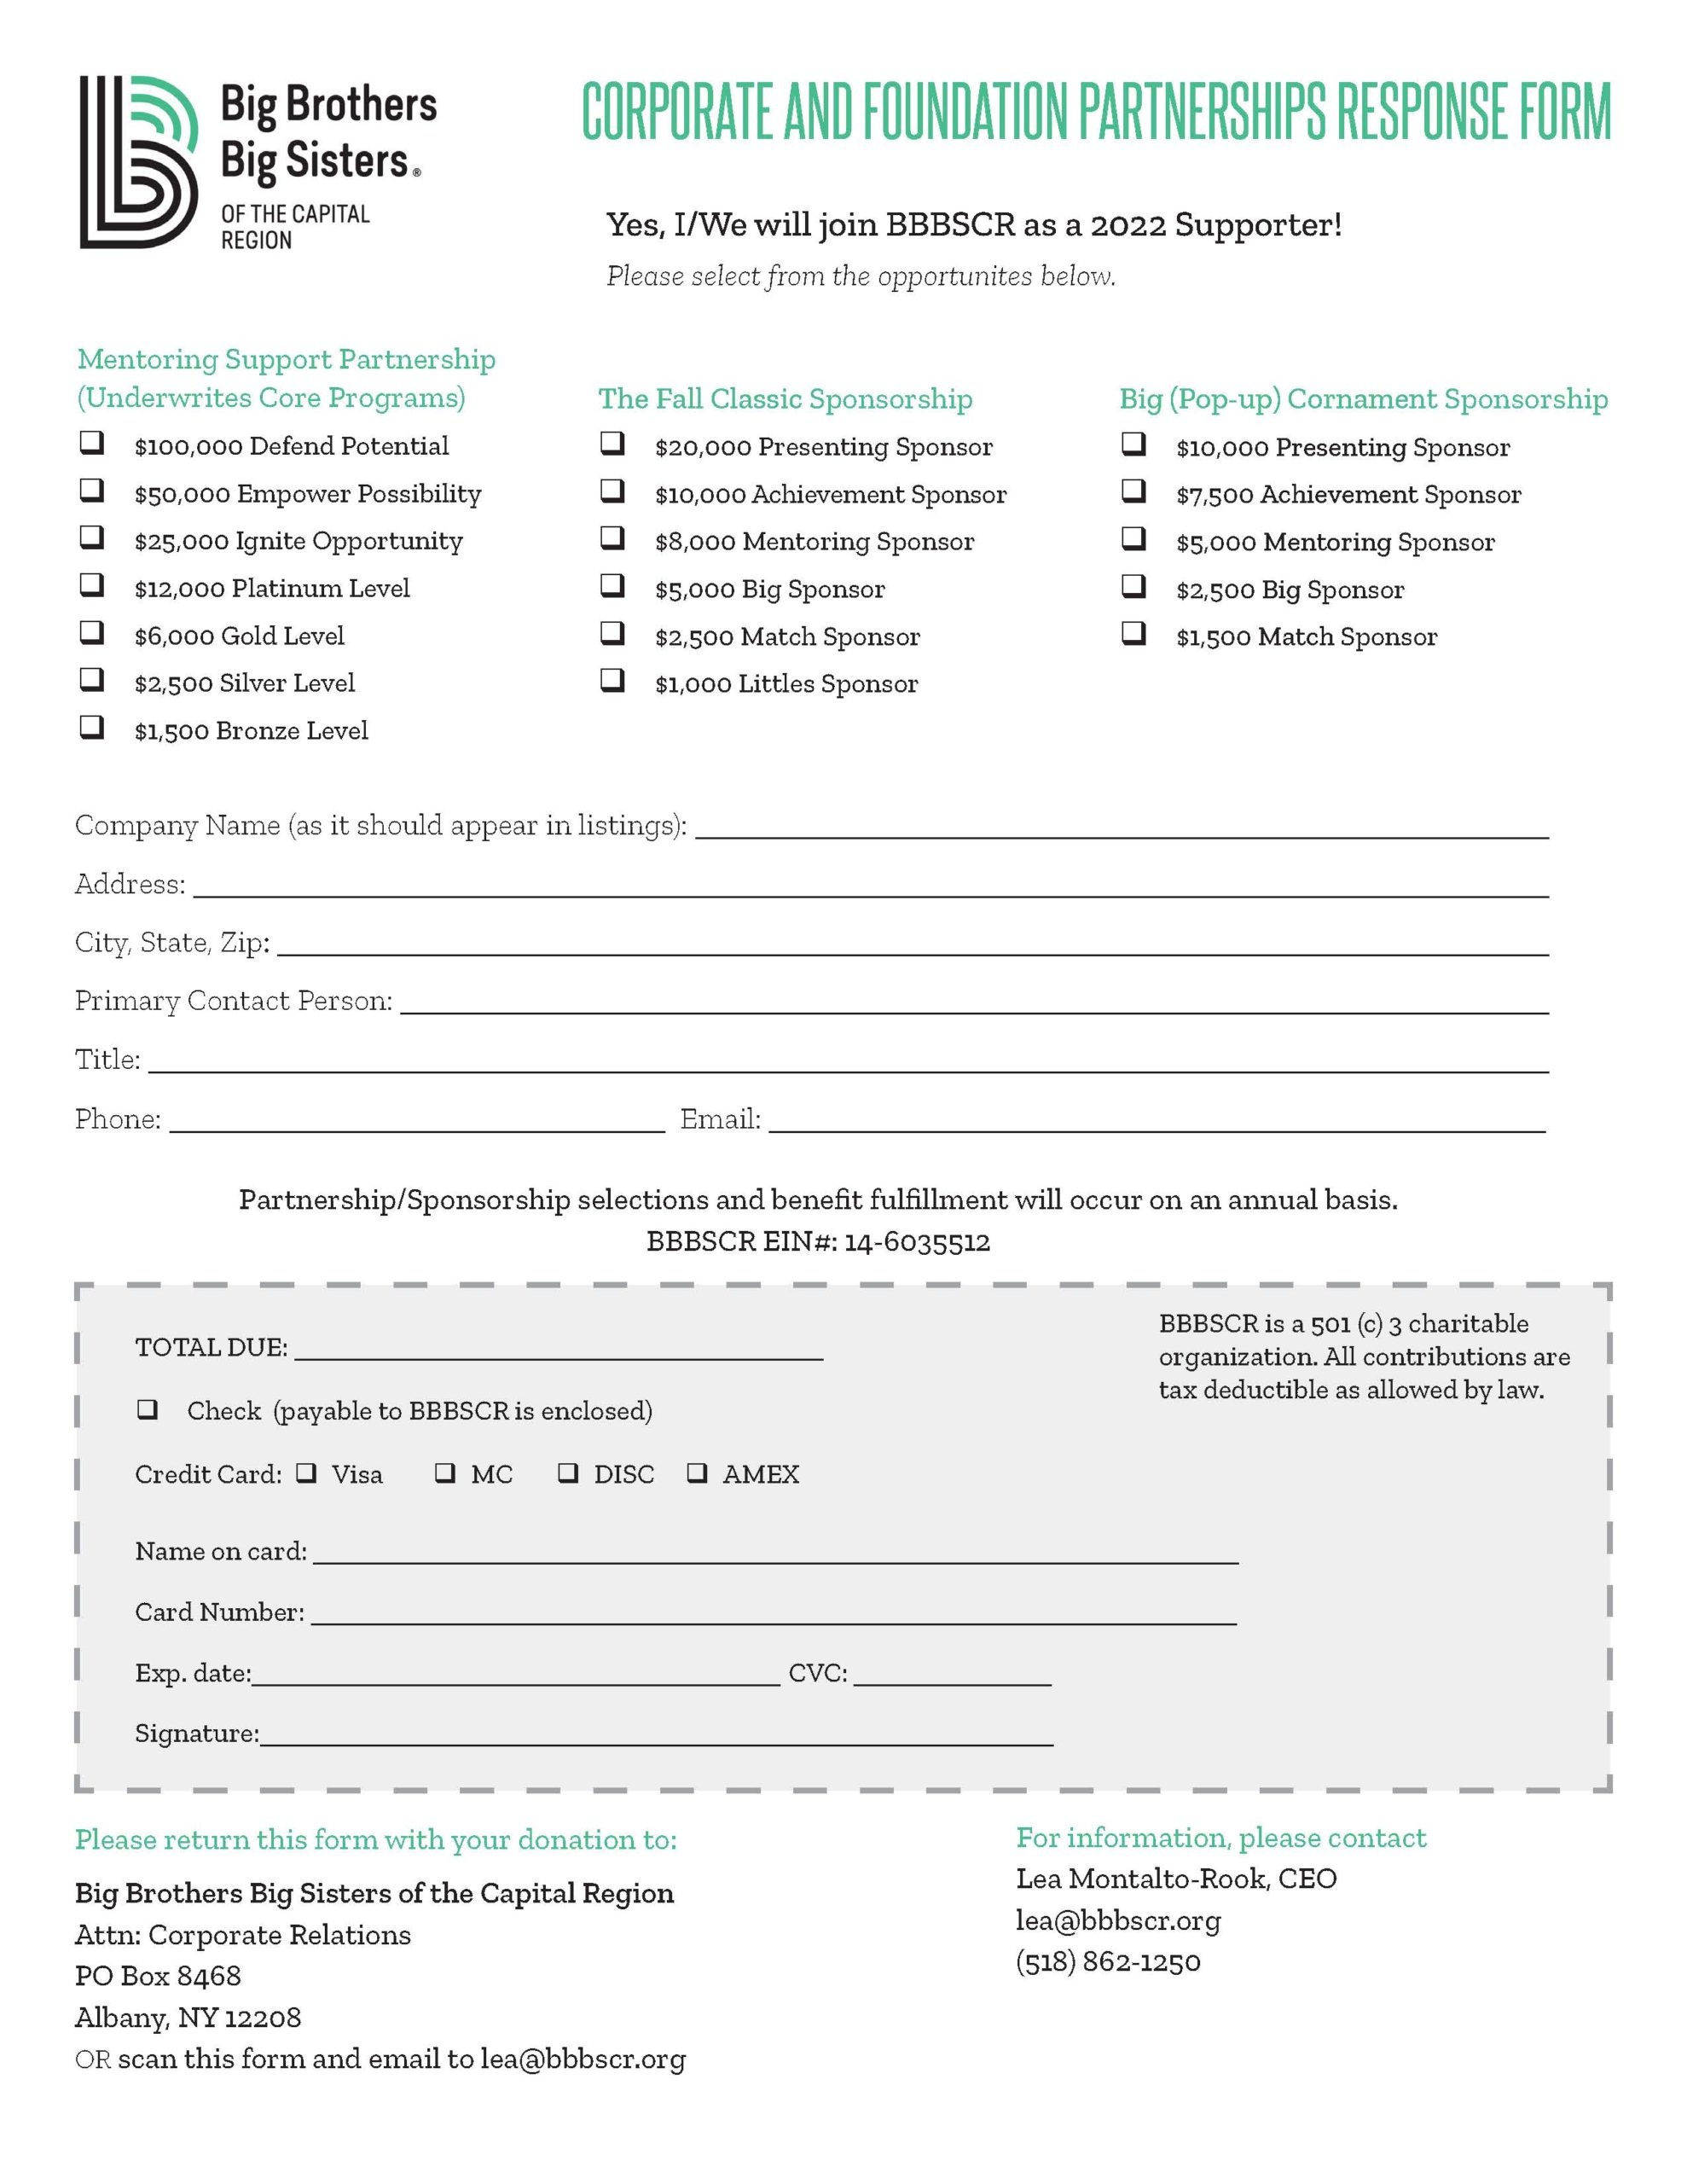 2022 BBBSCR Corporate Registration Form